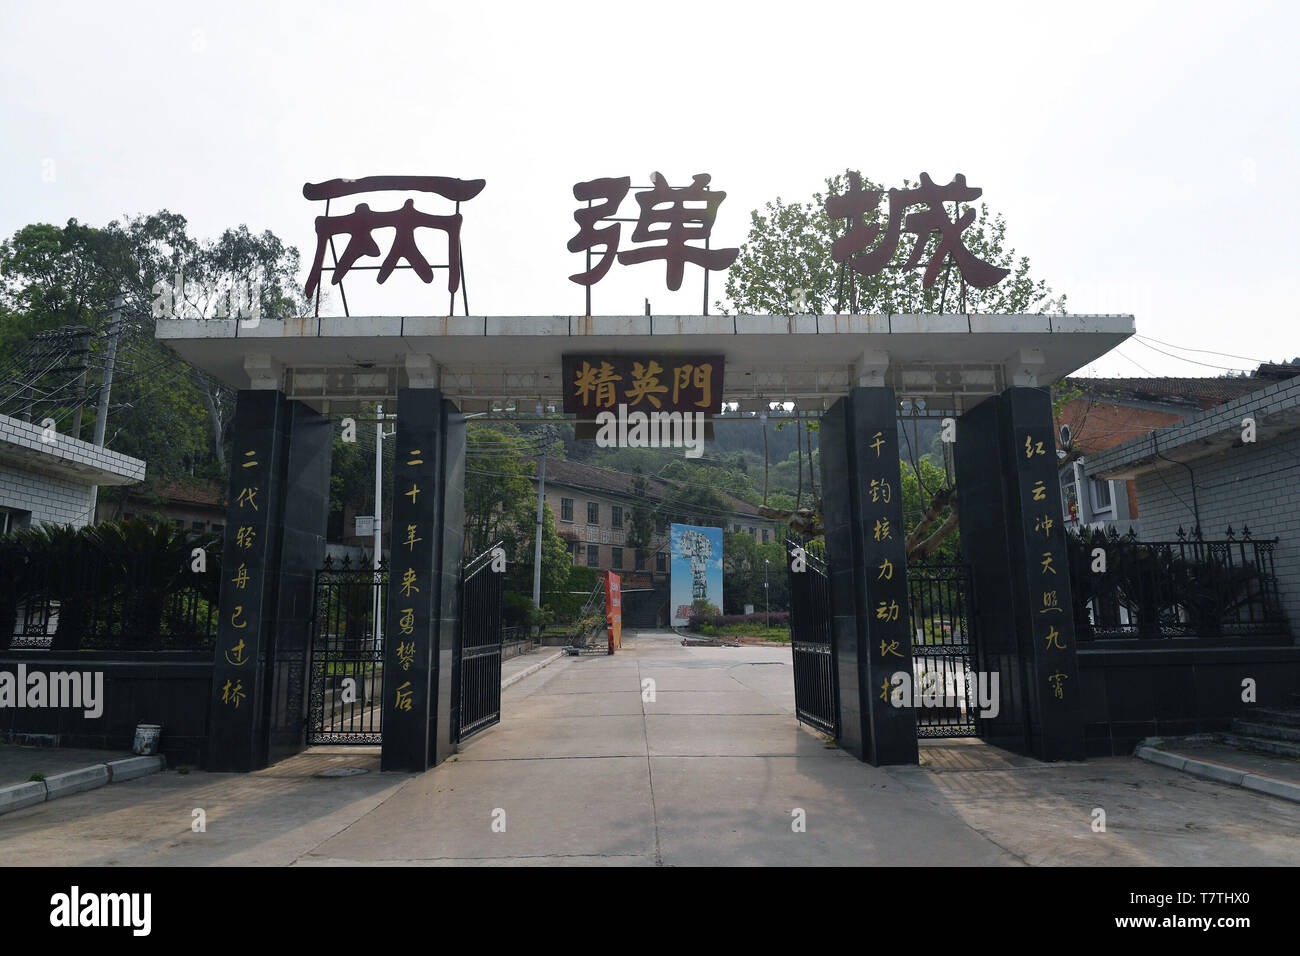 (190509) -- CHENGDU, May 9, 2019 (Xinhua) -- Photo taken on April 23, 2019 shows the main gate of the Liangdancheng, meaning the city of nuclear bombs, the site where China's first atomic and hydrogen bombs were designed, in Zitong County of Mianyang, southwest China's Sichuan Province. Zitong was home to the research headquarters of China's nuclear weapons program, where a dozen of world-class scientists worked for over a decade on China's first atomic and hydrogen bombs and satellite launches in the 1960s and 1970s. (Xinhua/Liu Kun) Stock Photo